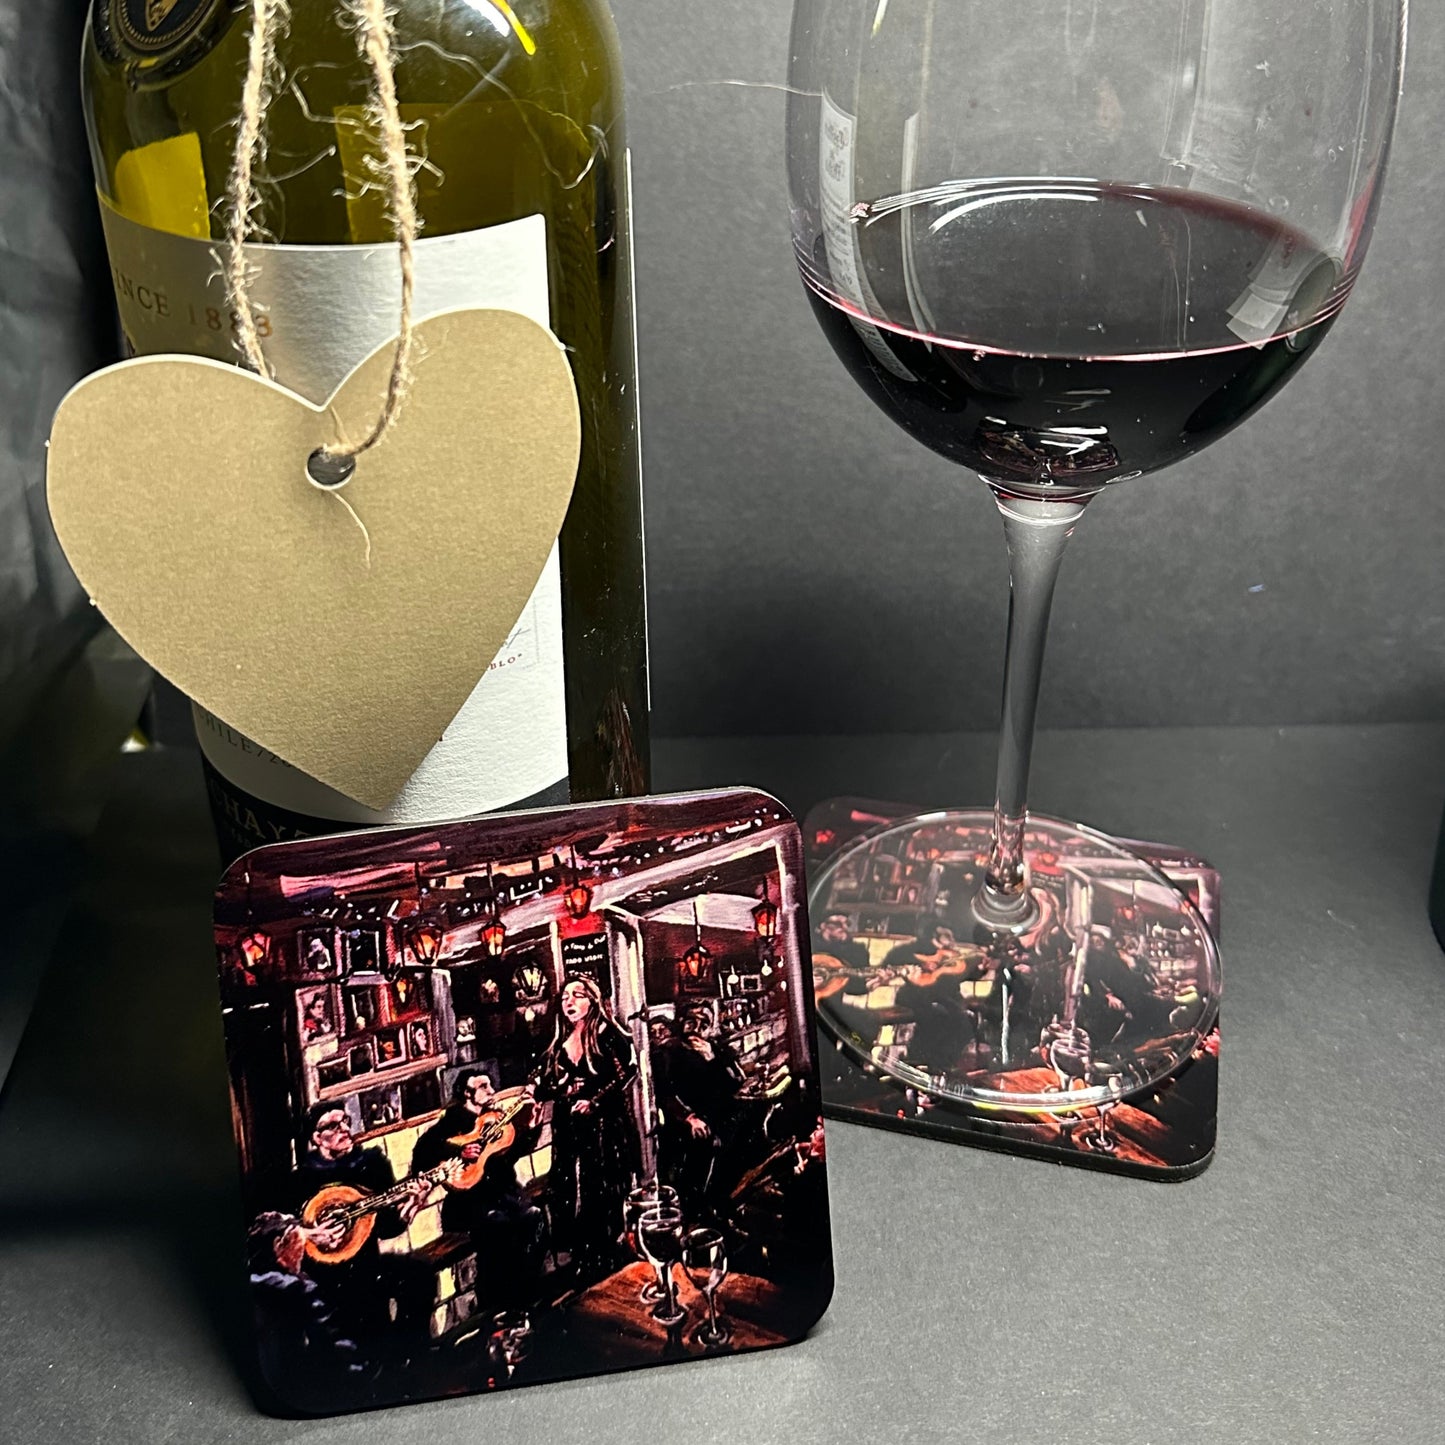 Wine glass rested on Fado Bar Lisbon Coaster with upright coaster to foreground